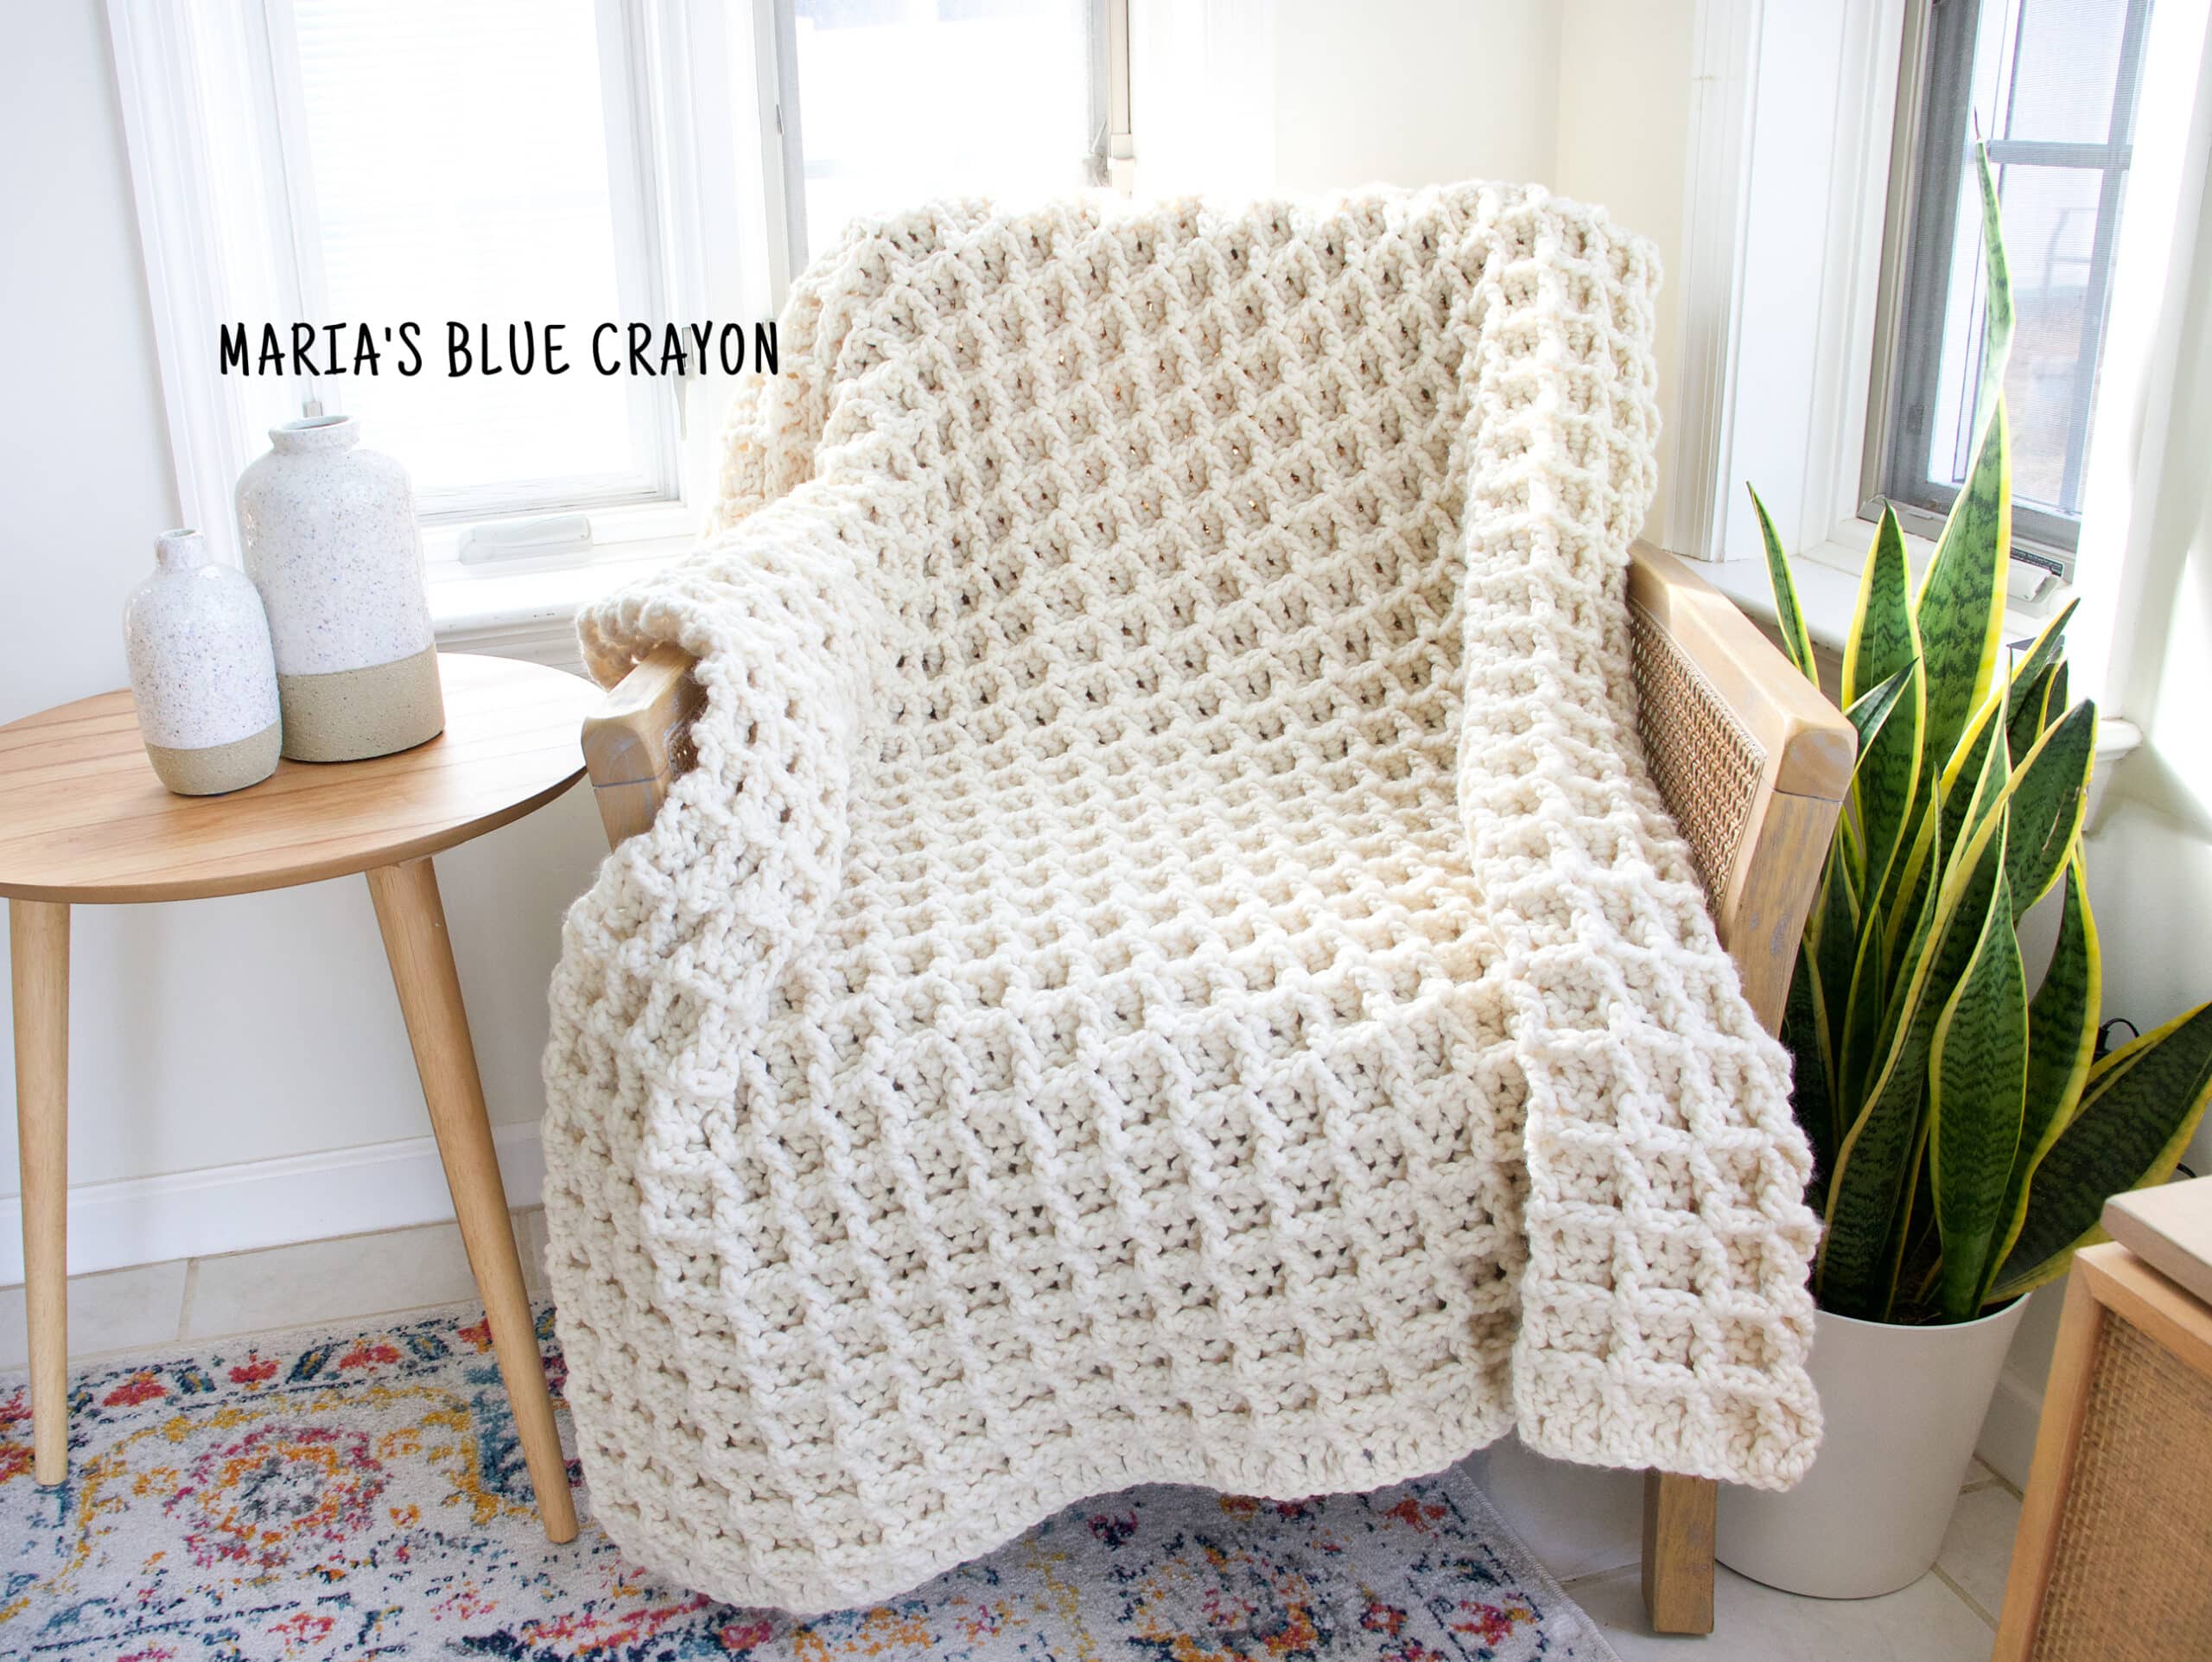 Wool-Ease Thick & Quick Yarn Crochet Patterns - Easy Crochet Patterns